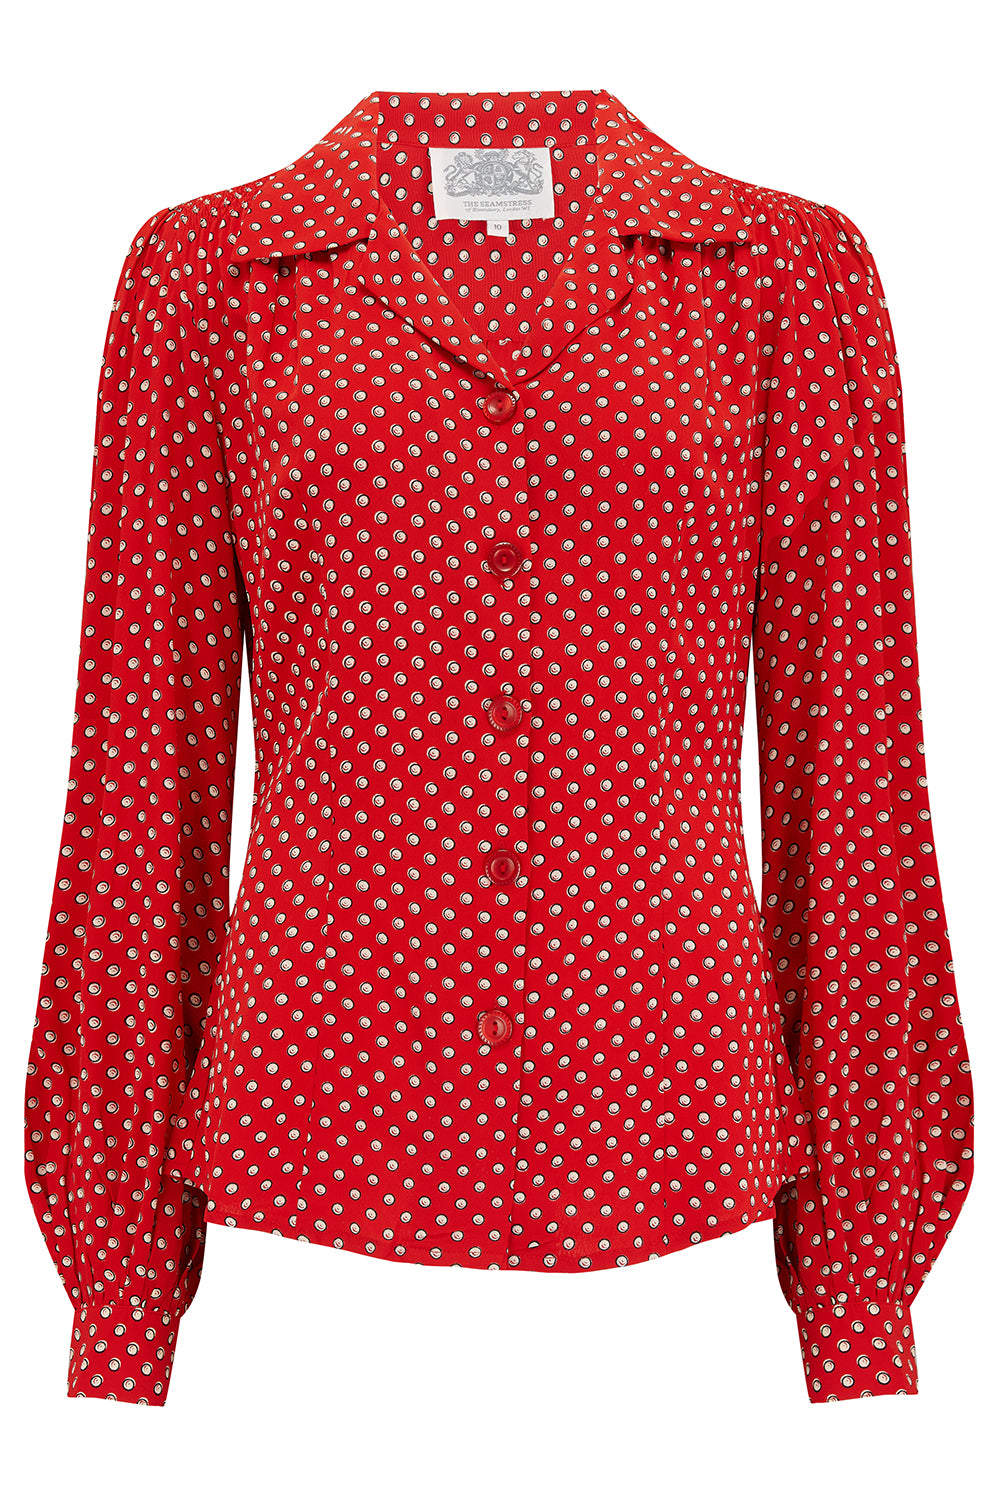 Poppy Long Sleeve Blouse in Red Ditzy Dot , Authentic & Classic 1940s Vintage Style - CC41, Goodwood Revival, Twinwood Festival, Viva Las Vegas Rockabilly Weekend Rock n Romance The Seamstress Of Bloomsbury